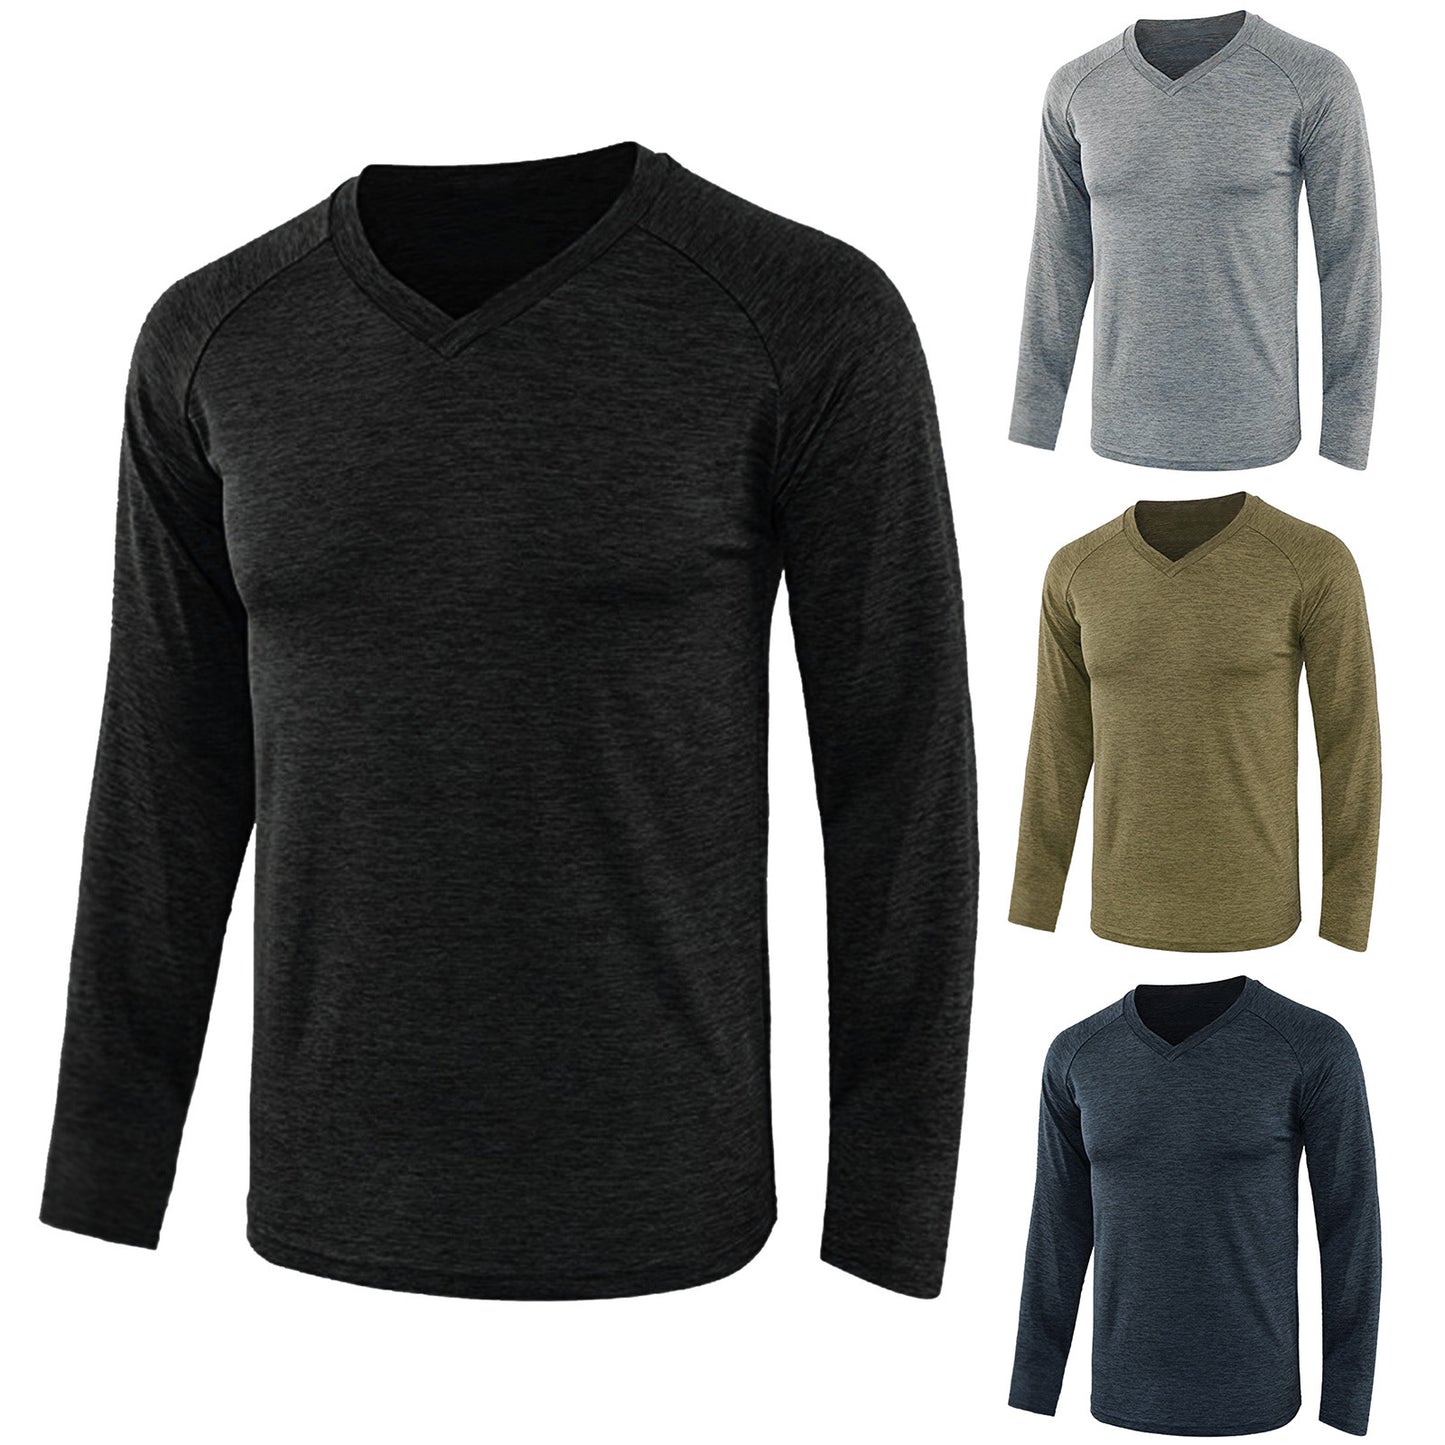 Men's Solid Color Long Sleeve Raglan Sleeve T-shirt - Trotters Independent Traders